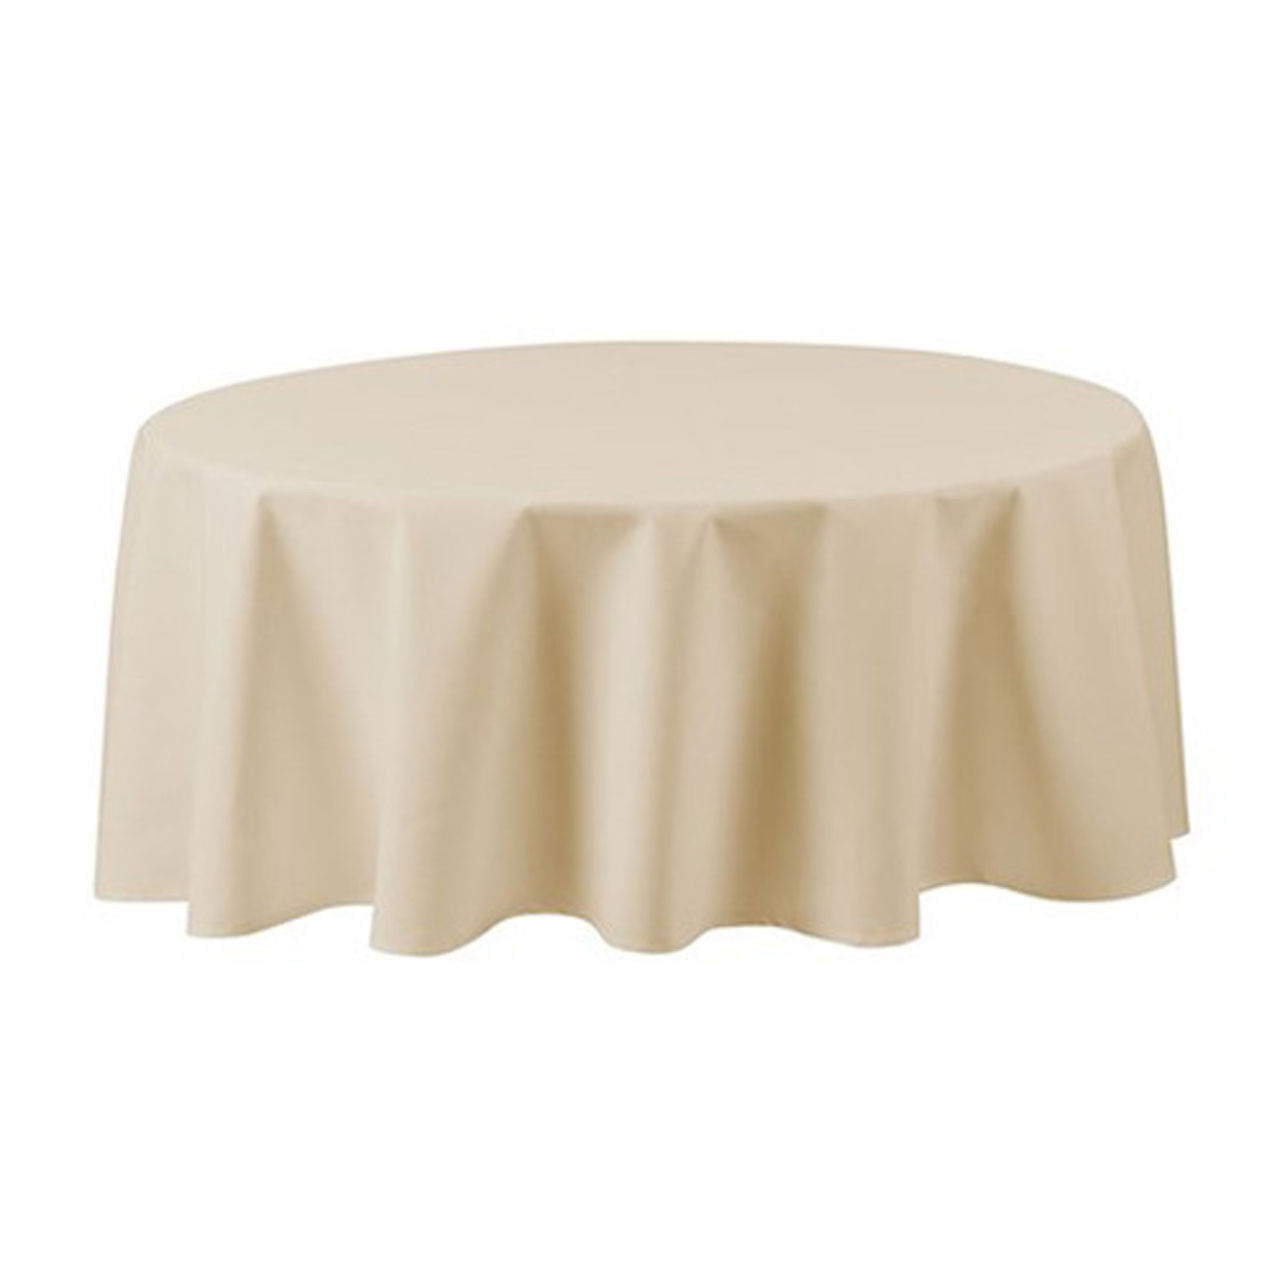 Where's the 120'' round ivory tablecloth wholesale imported from?